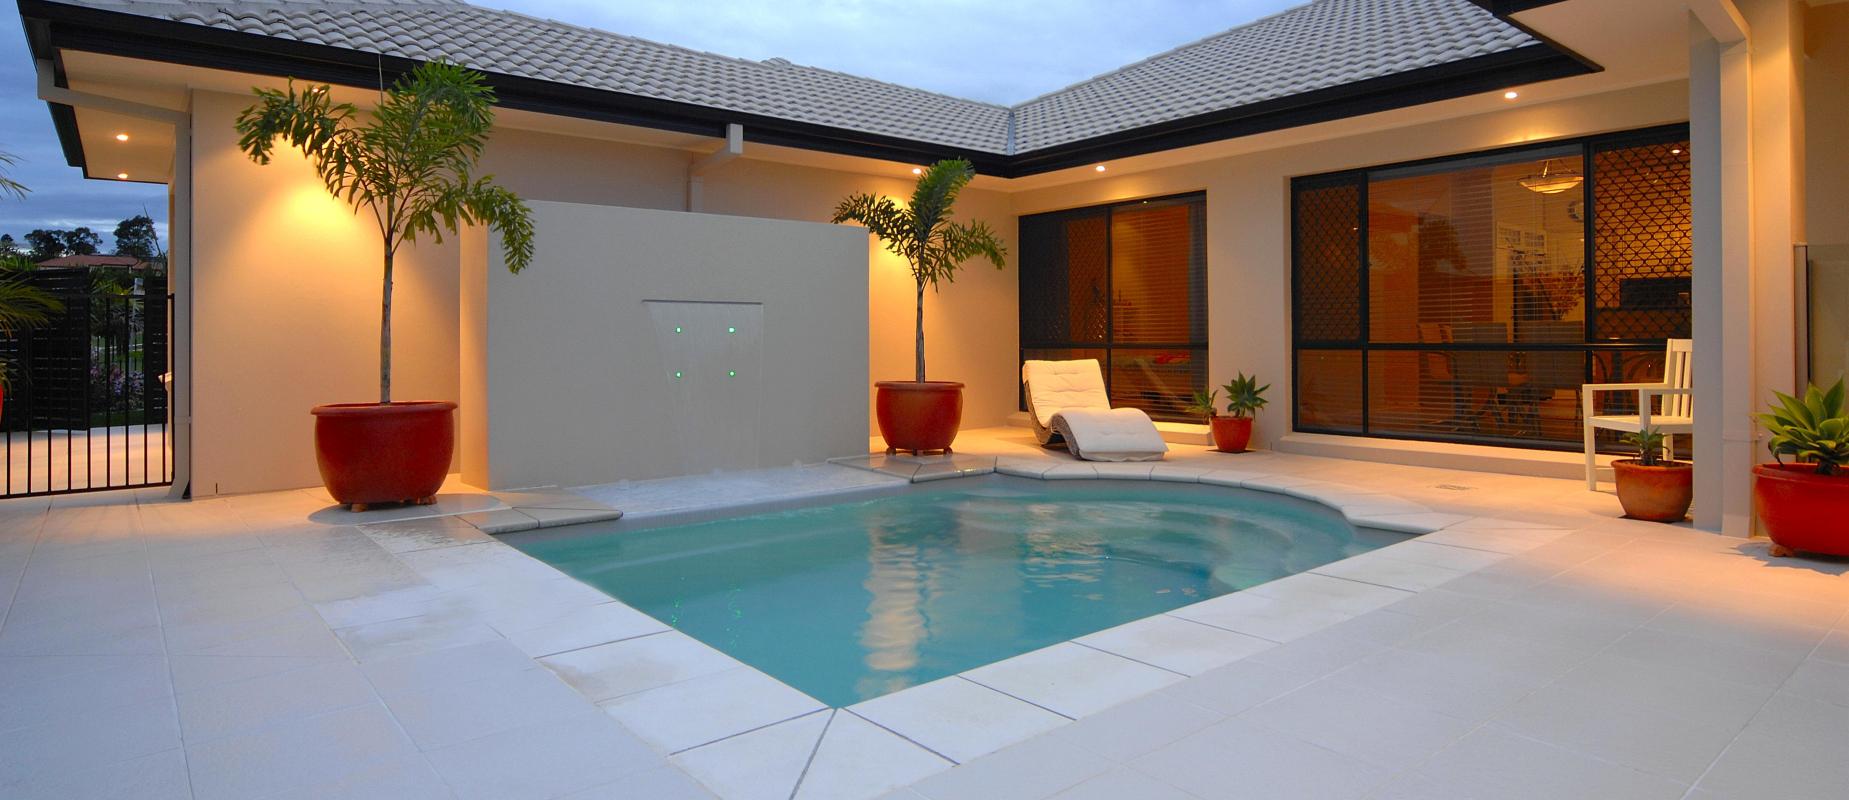 Compass-Pools-Australia_Plunge-Courtyard_Great-pool-for-smaller-backyard